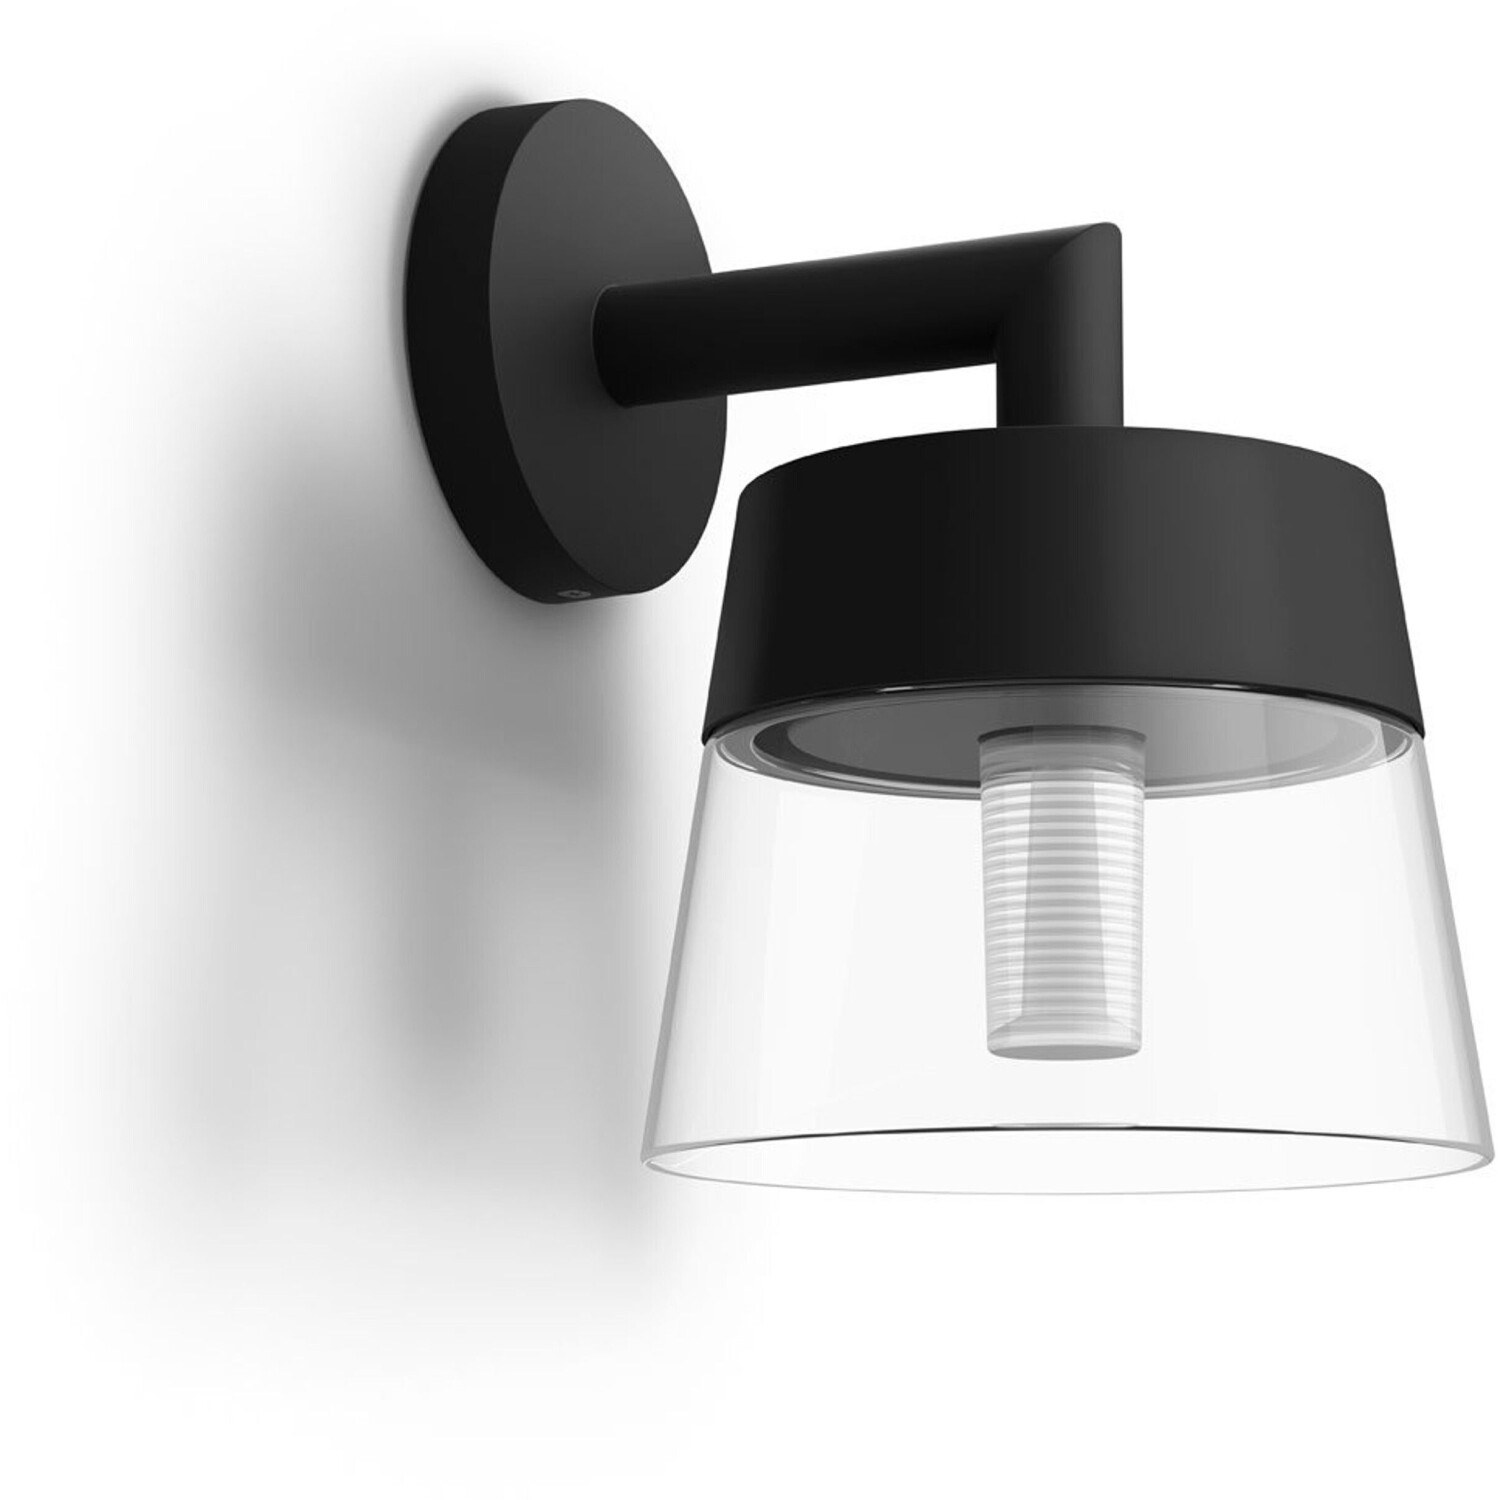 White Preisvergleich schwarz Outdoor Ambiance 17461/30/P7) bei Hue | ab Attract Philips € ( 132,50 Wall Light and Color